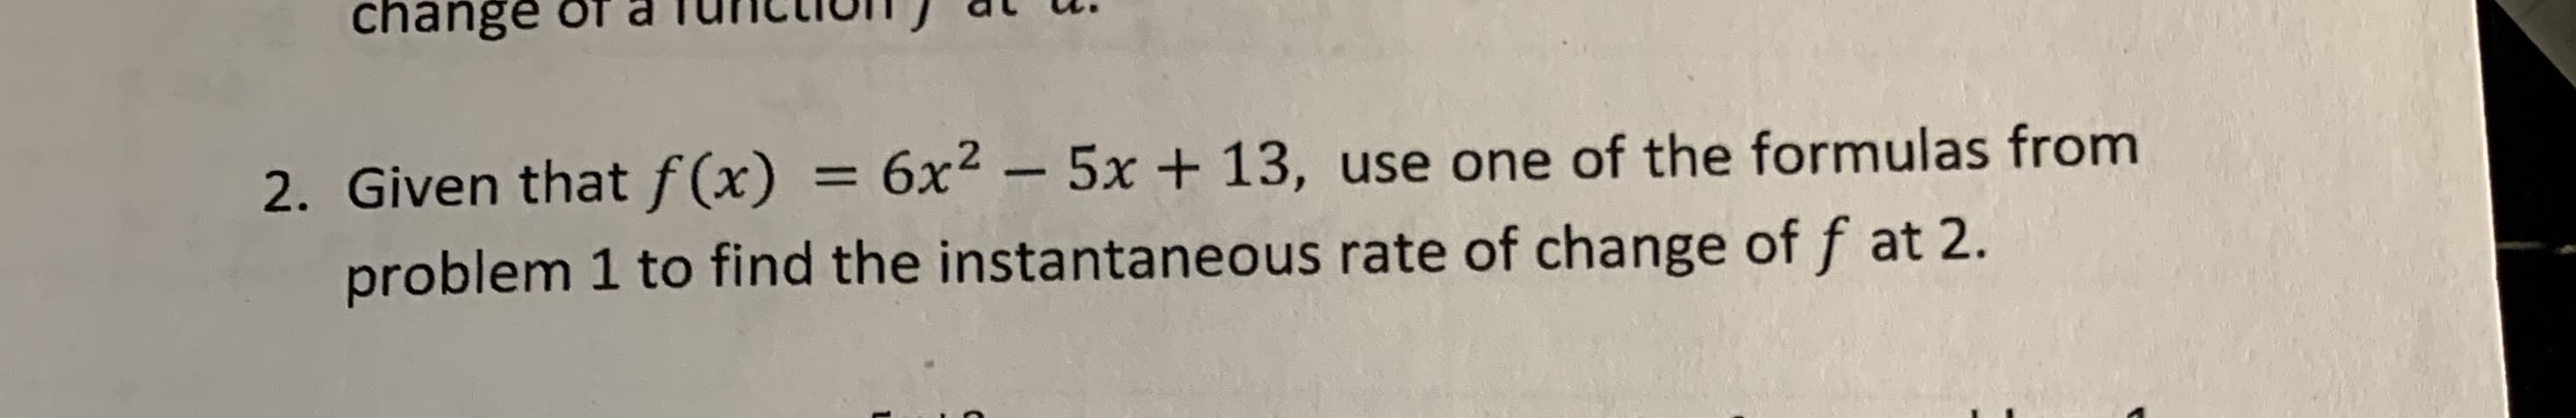 change or
6x2-5x + 13, use one of the formulas from
2. Given that f (x)
problem 1 to find the instantaneous rate of change of f at 2
